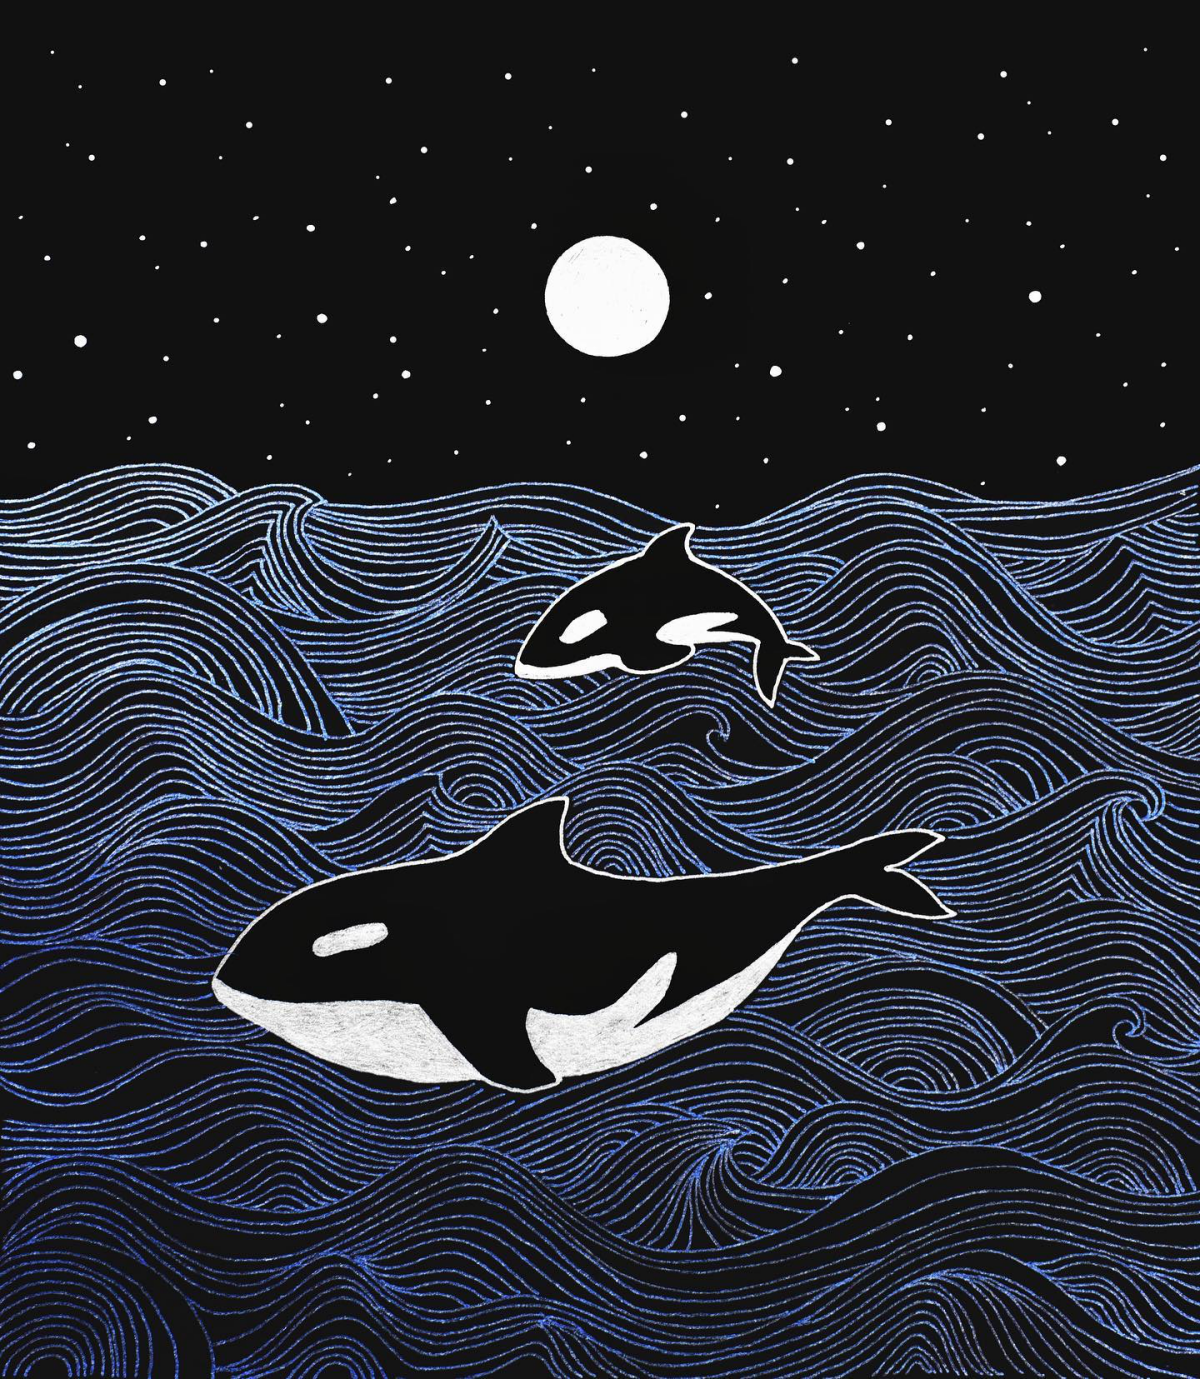 whales swiming in night waters